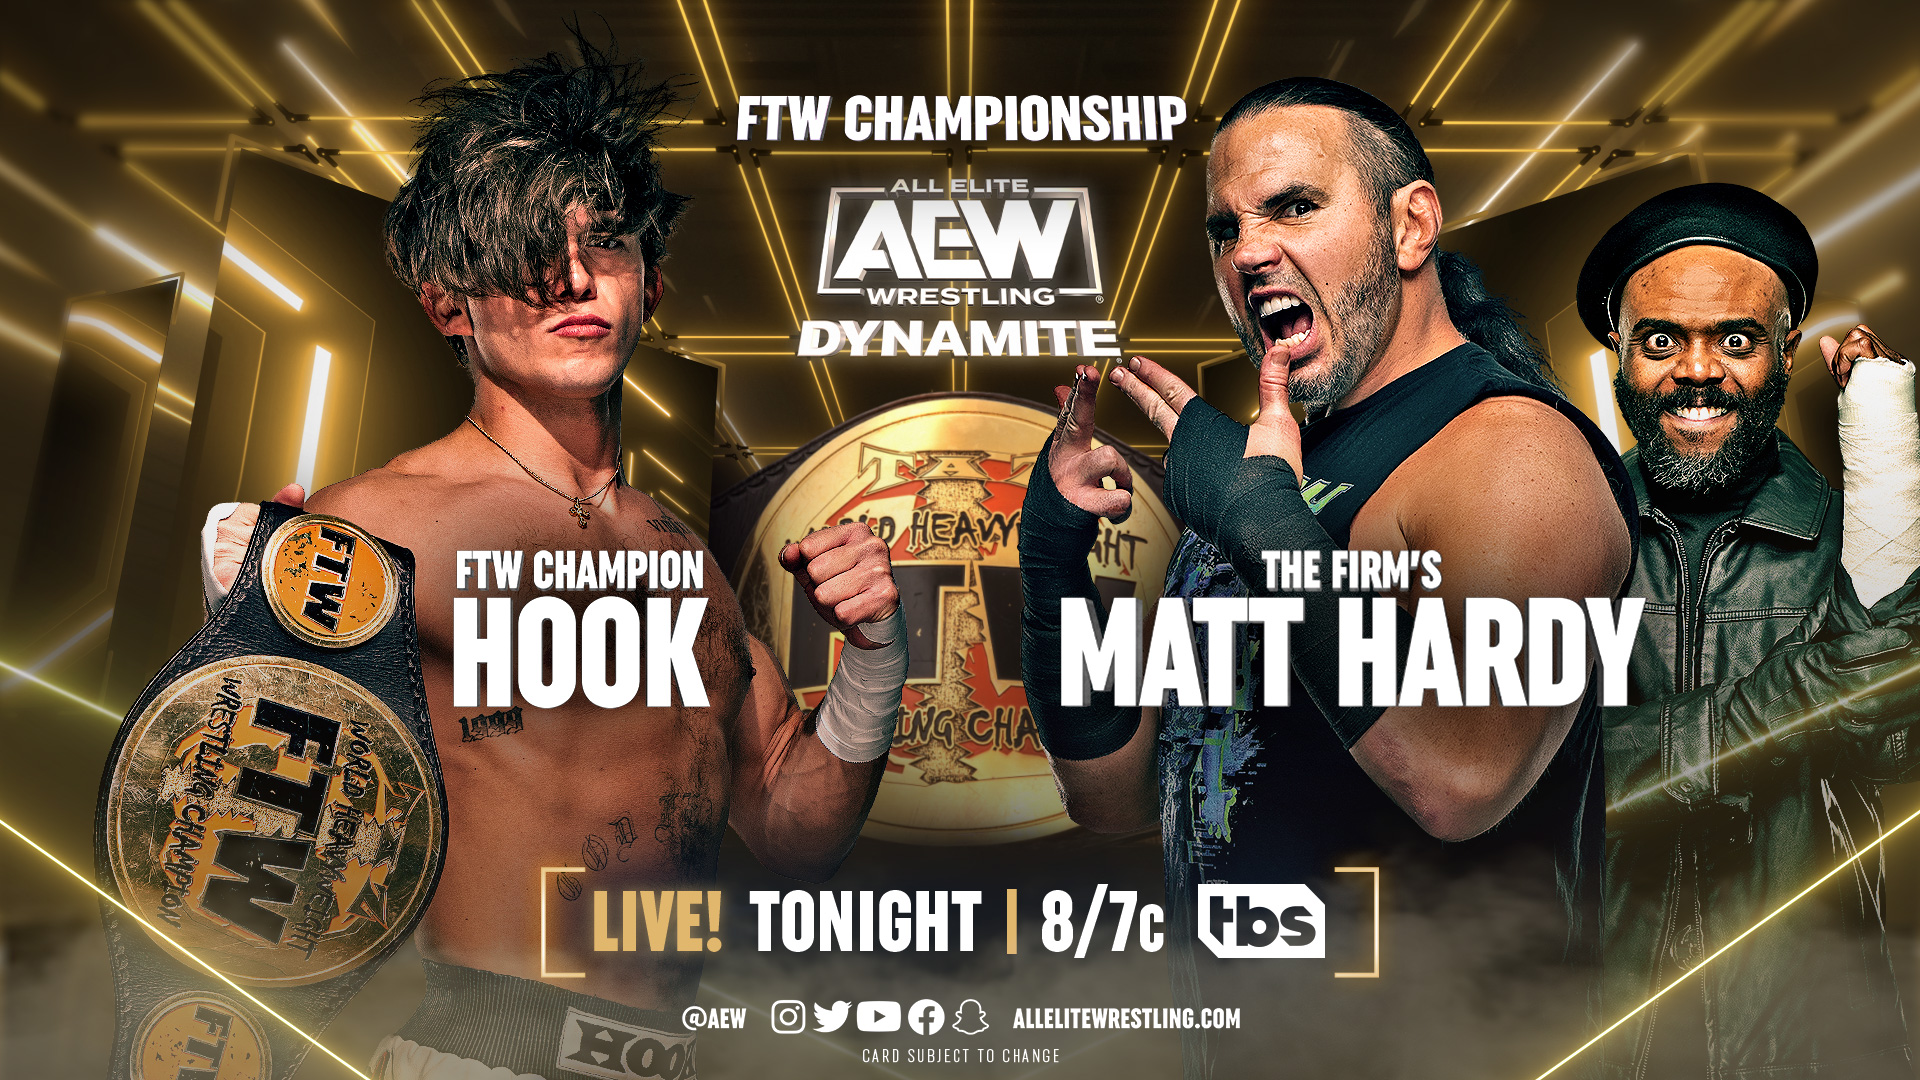 All Elite Wrestling on X: As stated by @OfficialEGO, @MATTHARDYBRAND, and  @IsiahKassidy last week, if #FTW Champion @730Hook beats Matt Hardy TONIGHT  at #AEWDynamite, he will get a NO DQ match against @